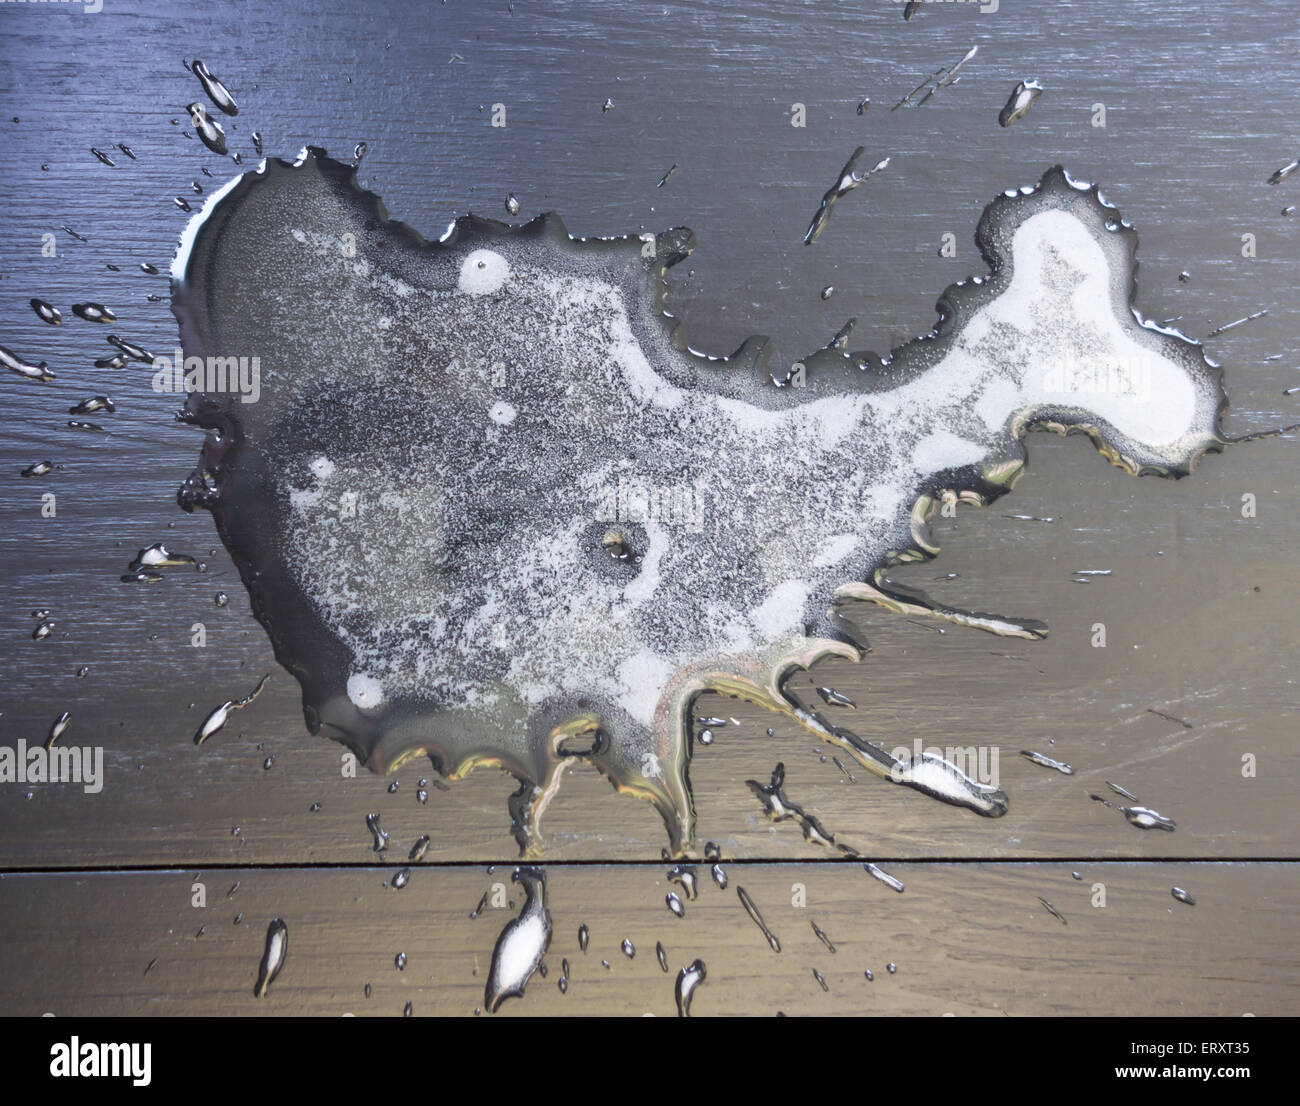 spilled liquid on the table Stock Photo - Alamy